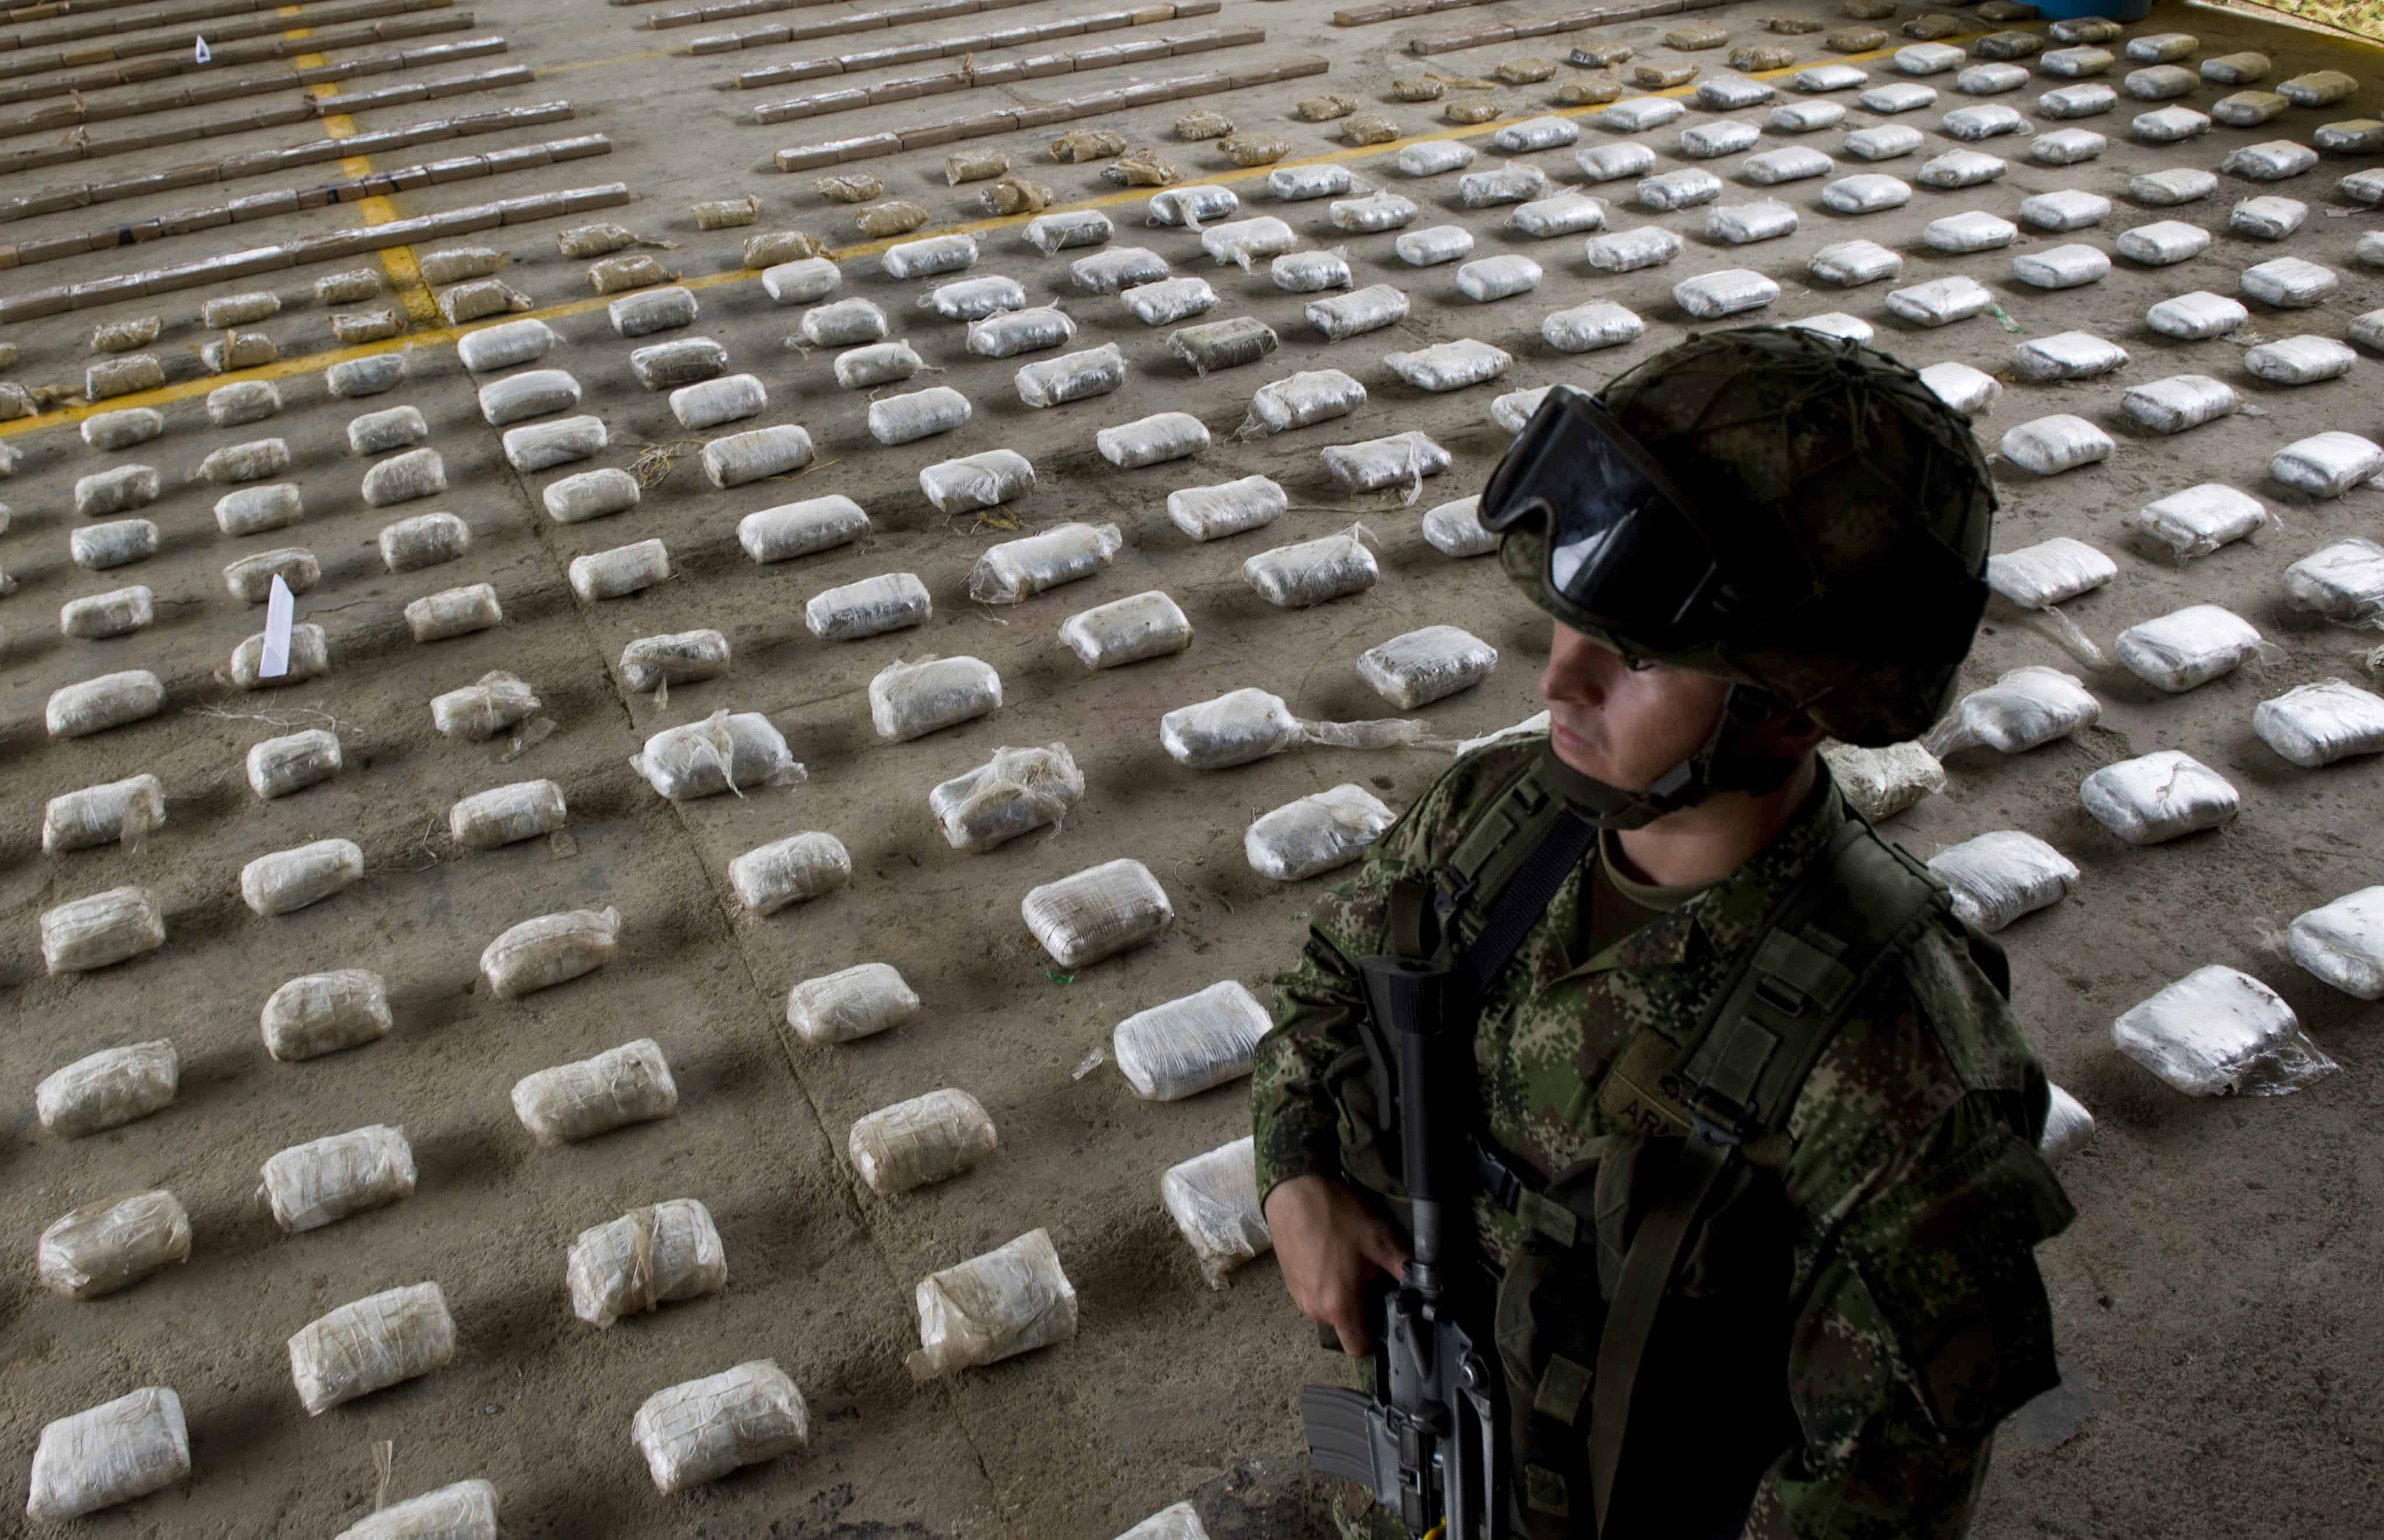 A Colombian soldier stands next to packages of seized cocaine.